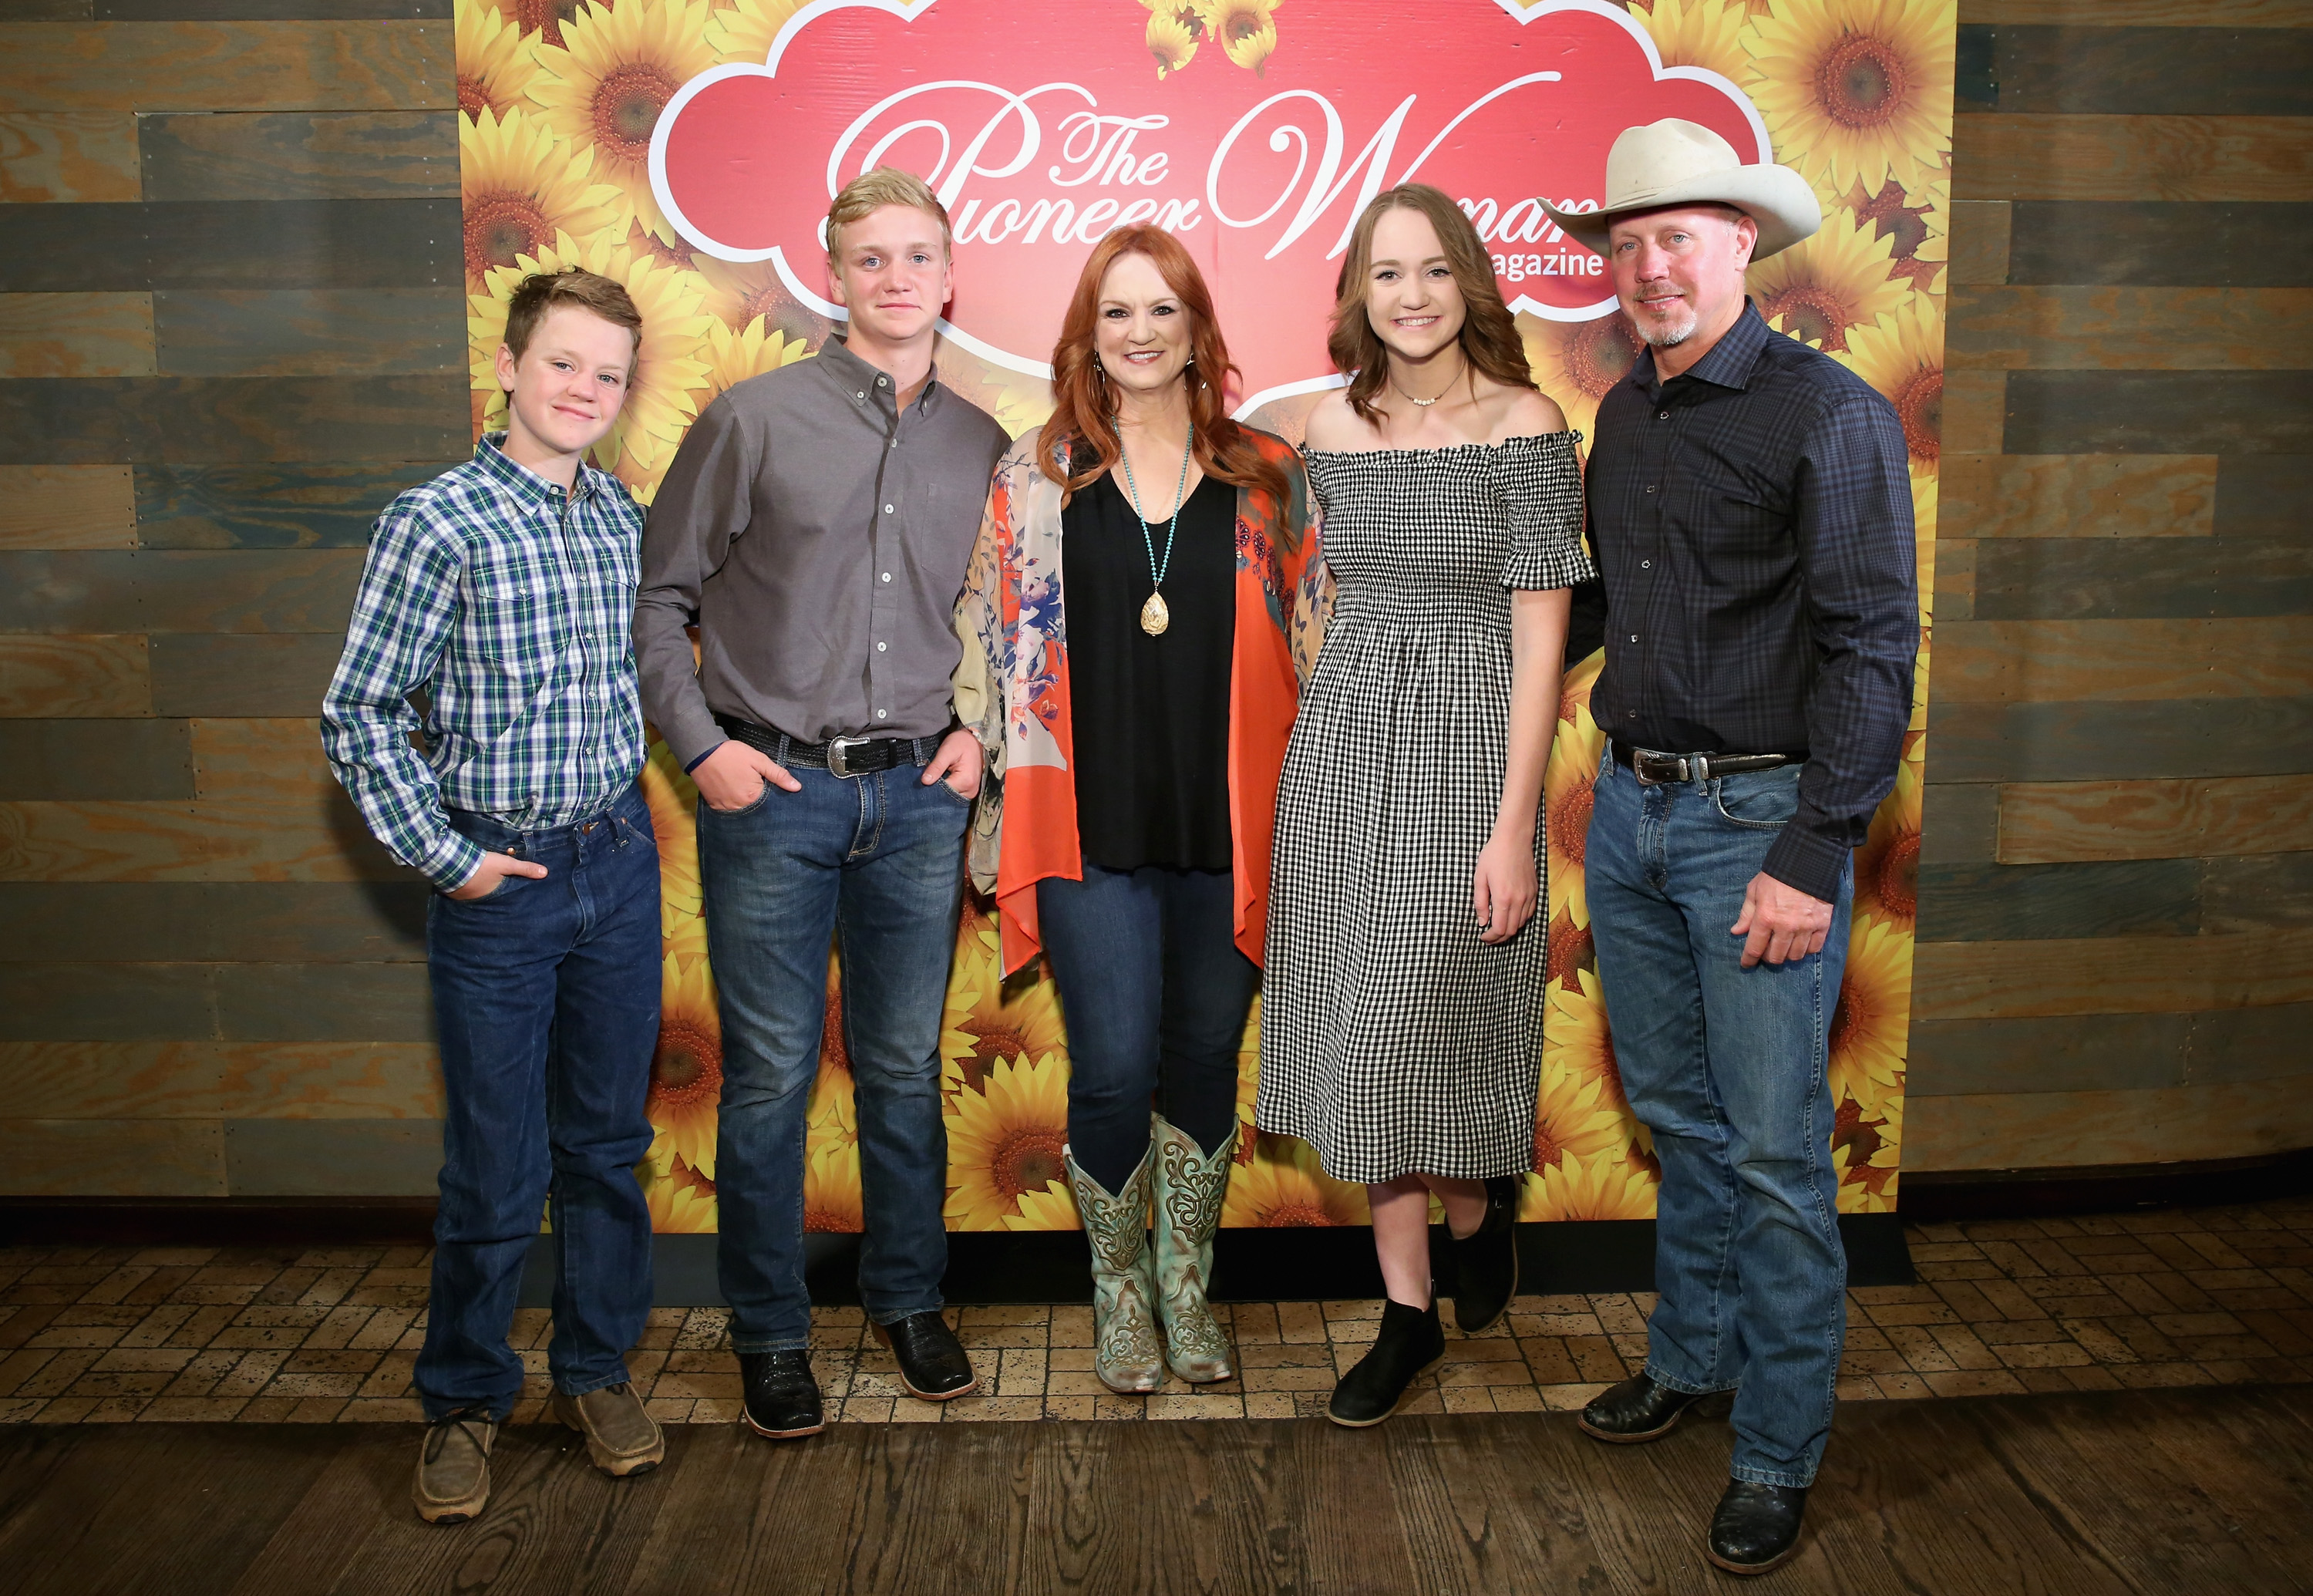 Ree Drummond, The Pioneer Woman, poses with her family at an event.